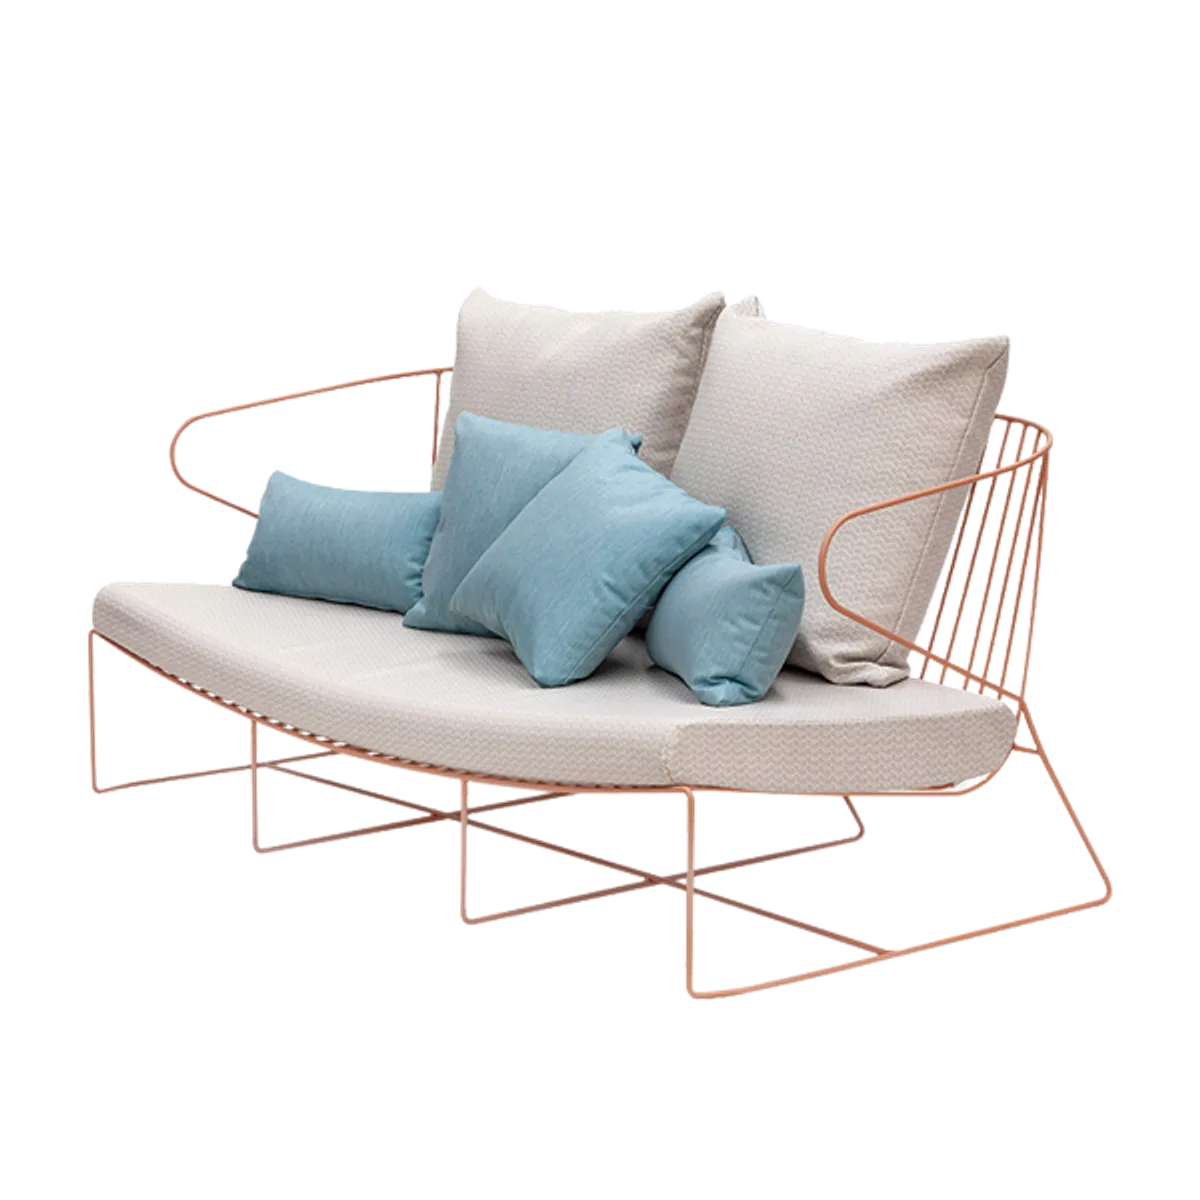 Web Bali Sofa Living Coral Colour Metal Contract Furniture For Outdoor Use In Hotels Bars Cafes And Healthcare With Seat Cushion Insideoutcontratcs